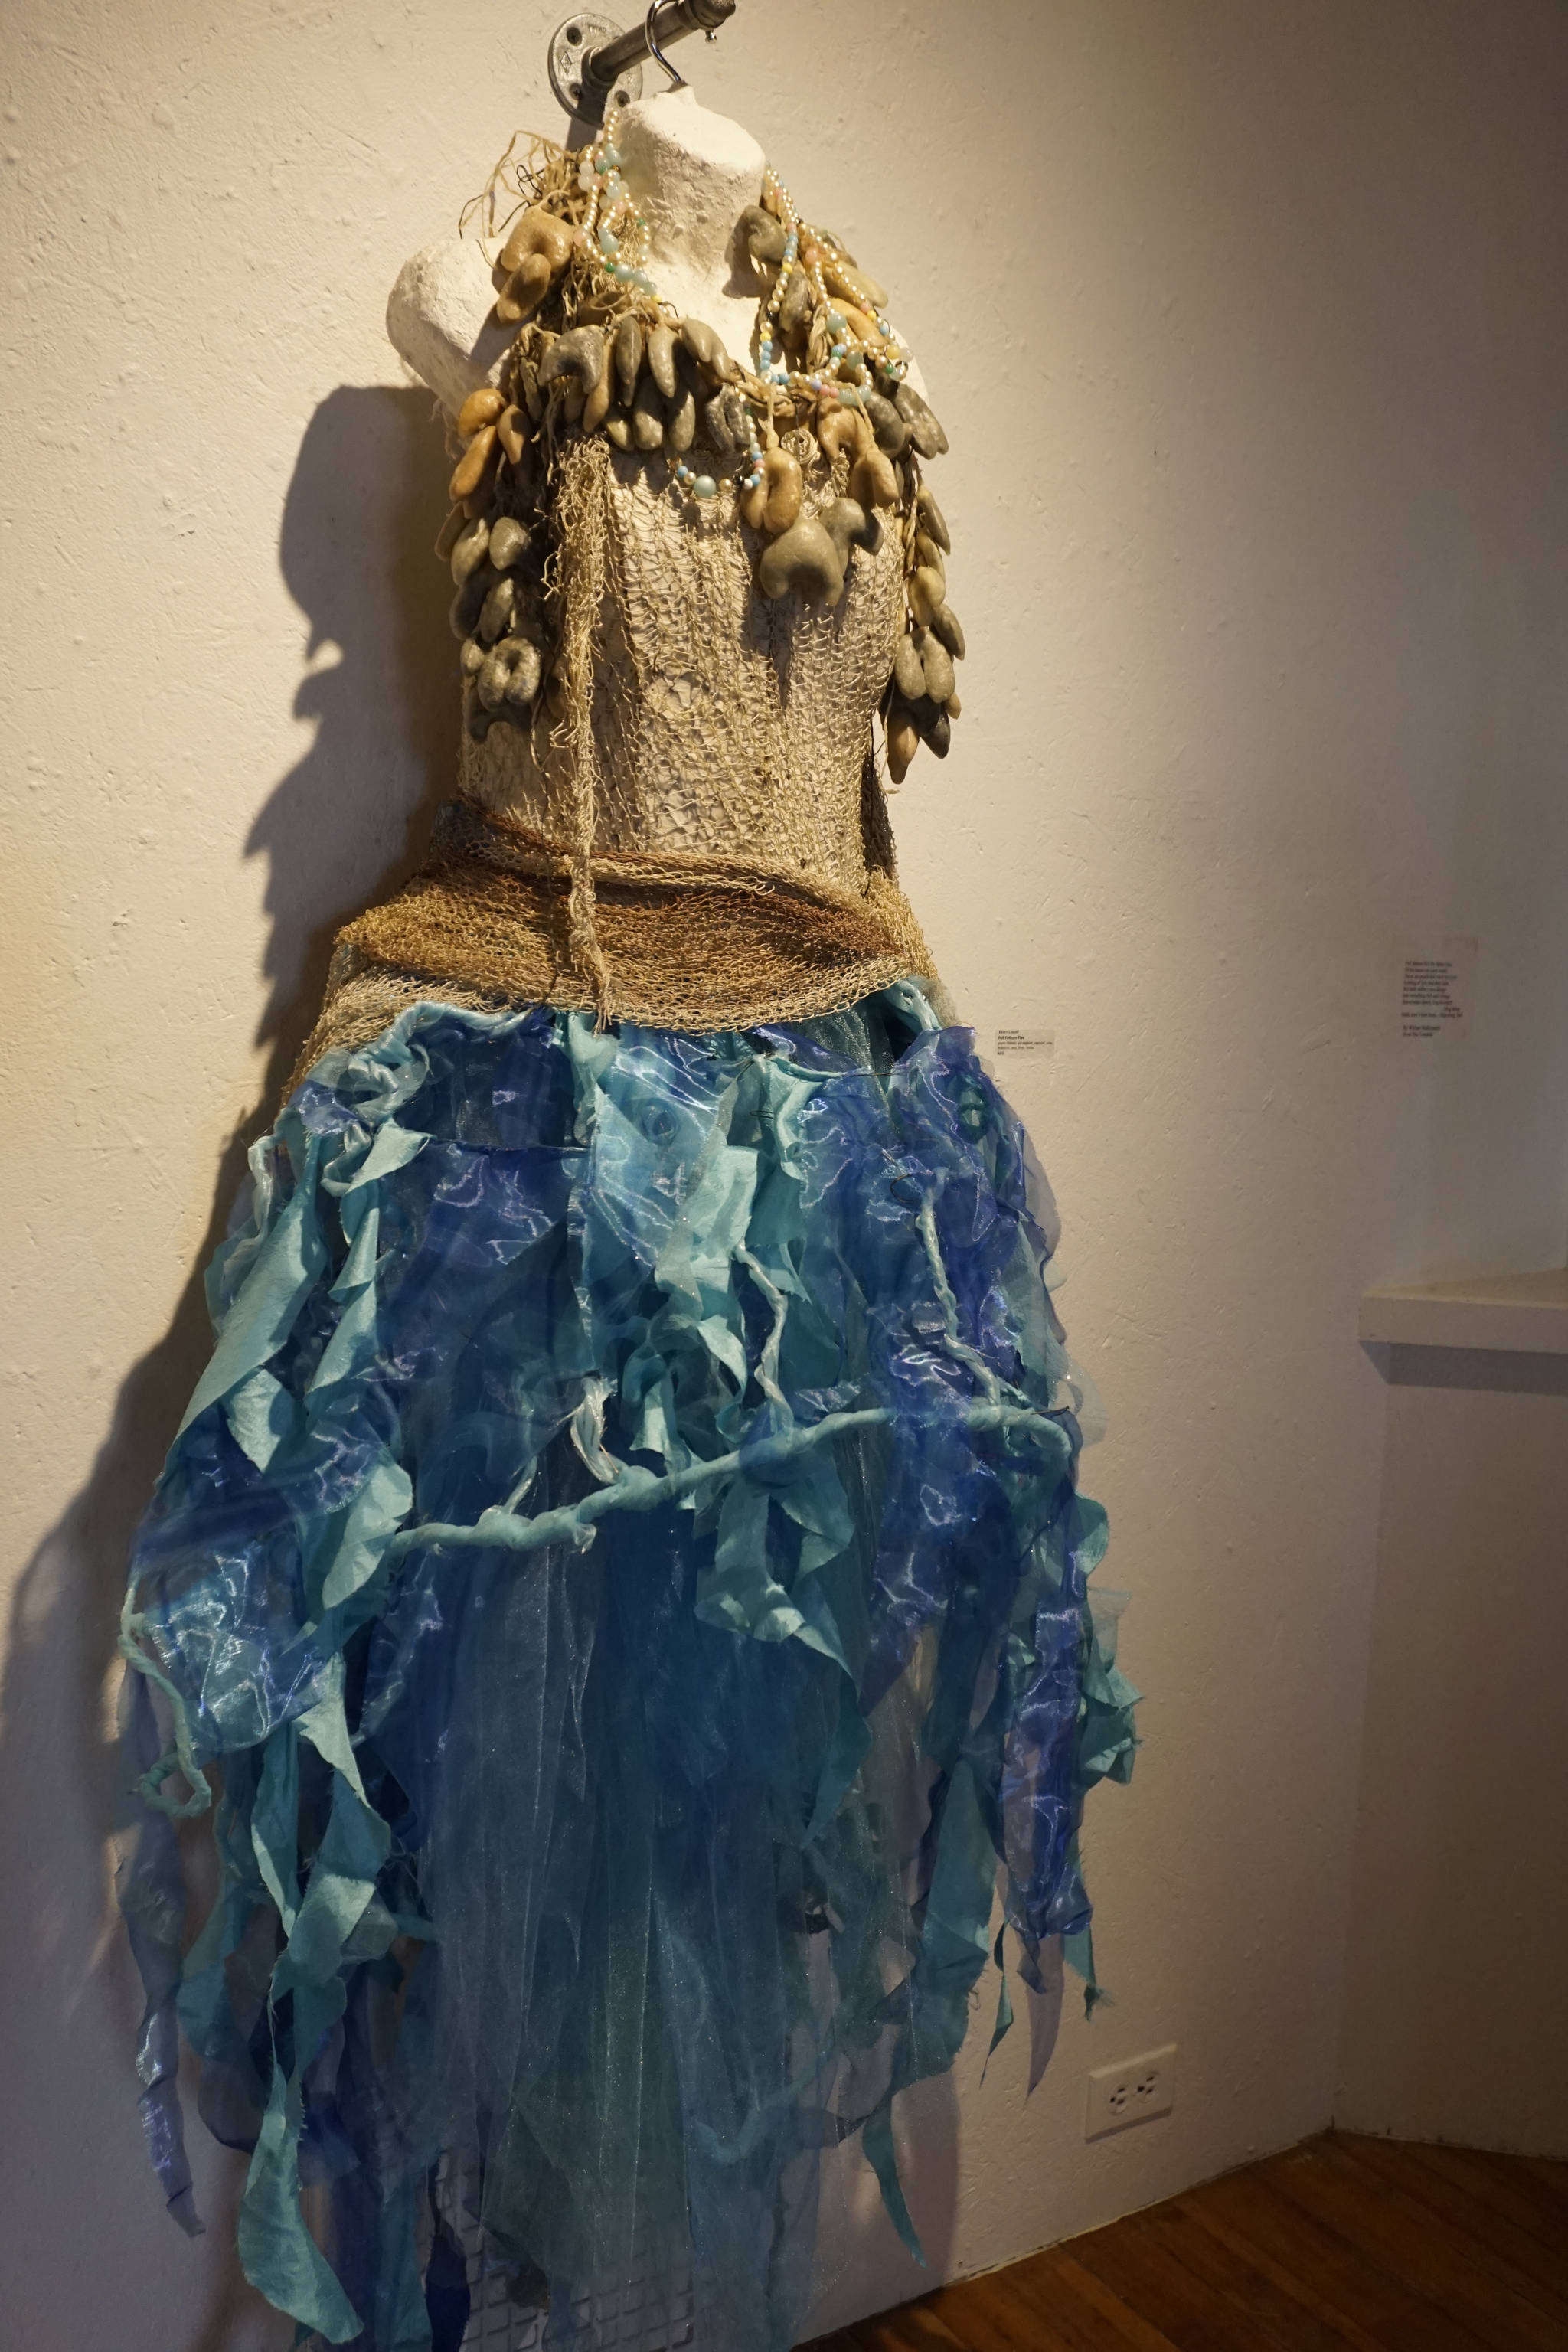 Keren Lowell’s “Full Fathom Five,” part of her show at Bunnell Street Arts Center as seen at the First Friday, Oct. 6, 2018, opening in Homer, Alaska. The title refers to a line in Willam Shakespear’es “The Tempest”: “Full fathom five thy father lies.” Many of Lowell’s garments have poetic references. (Photo by Michael Armstrong/Homer News)